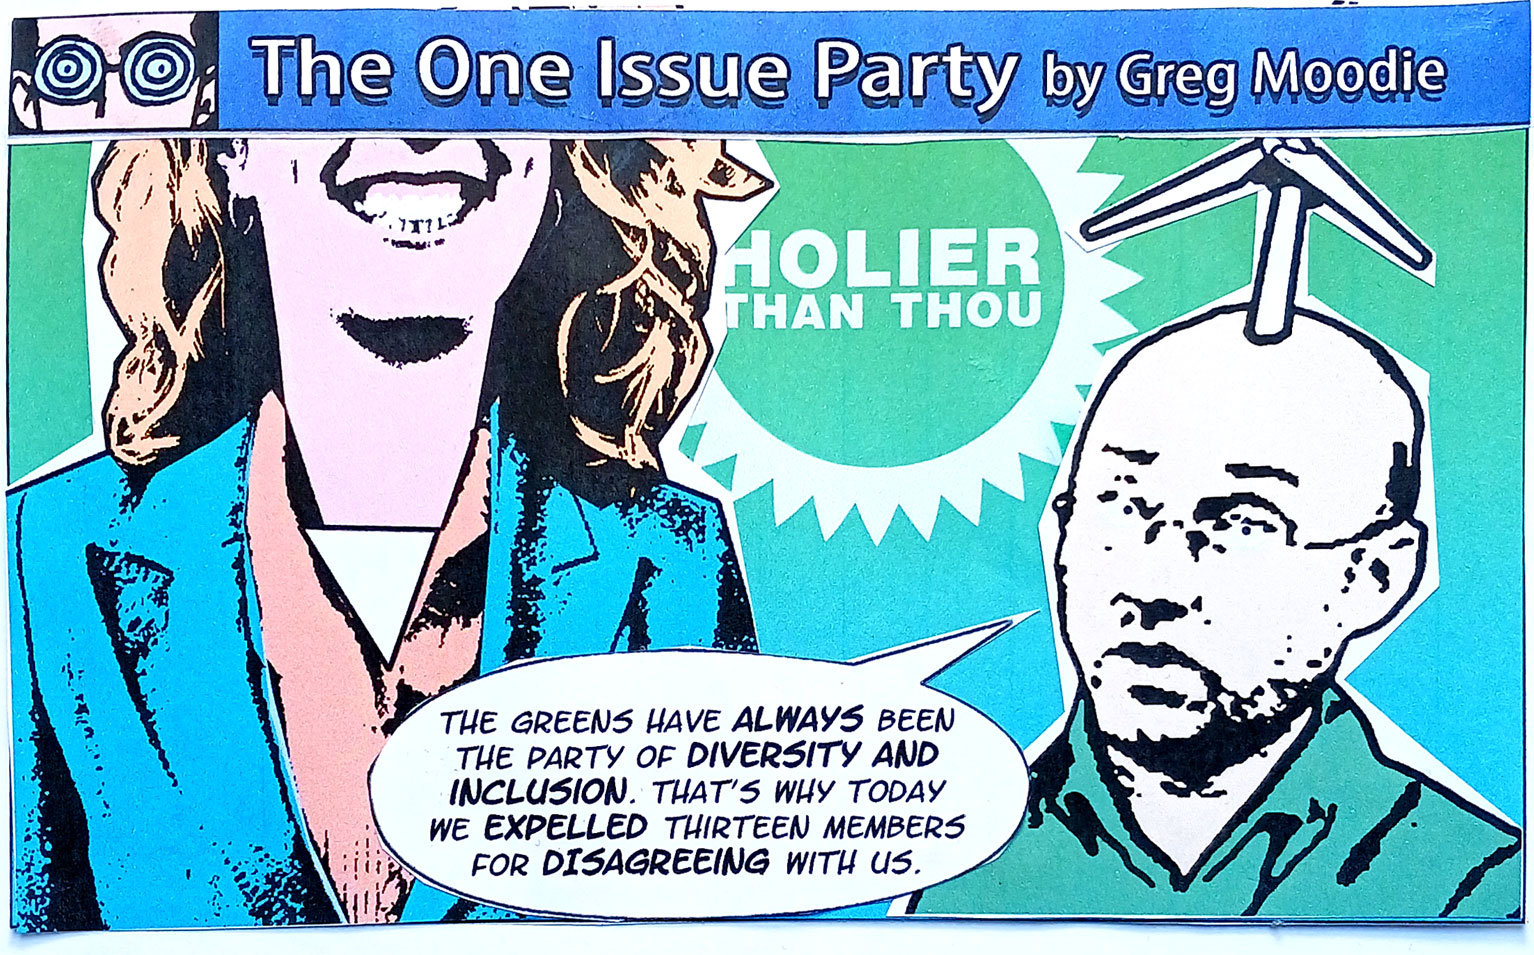 The One Issue Party